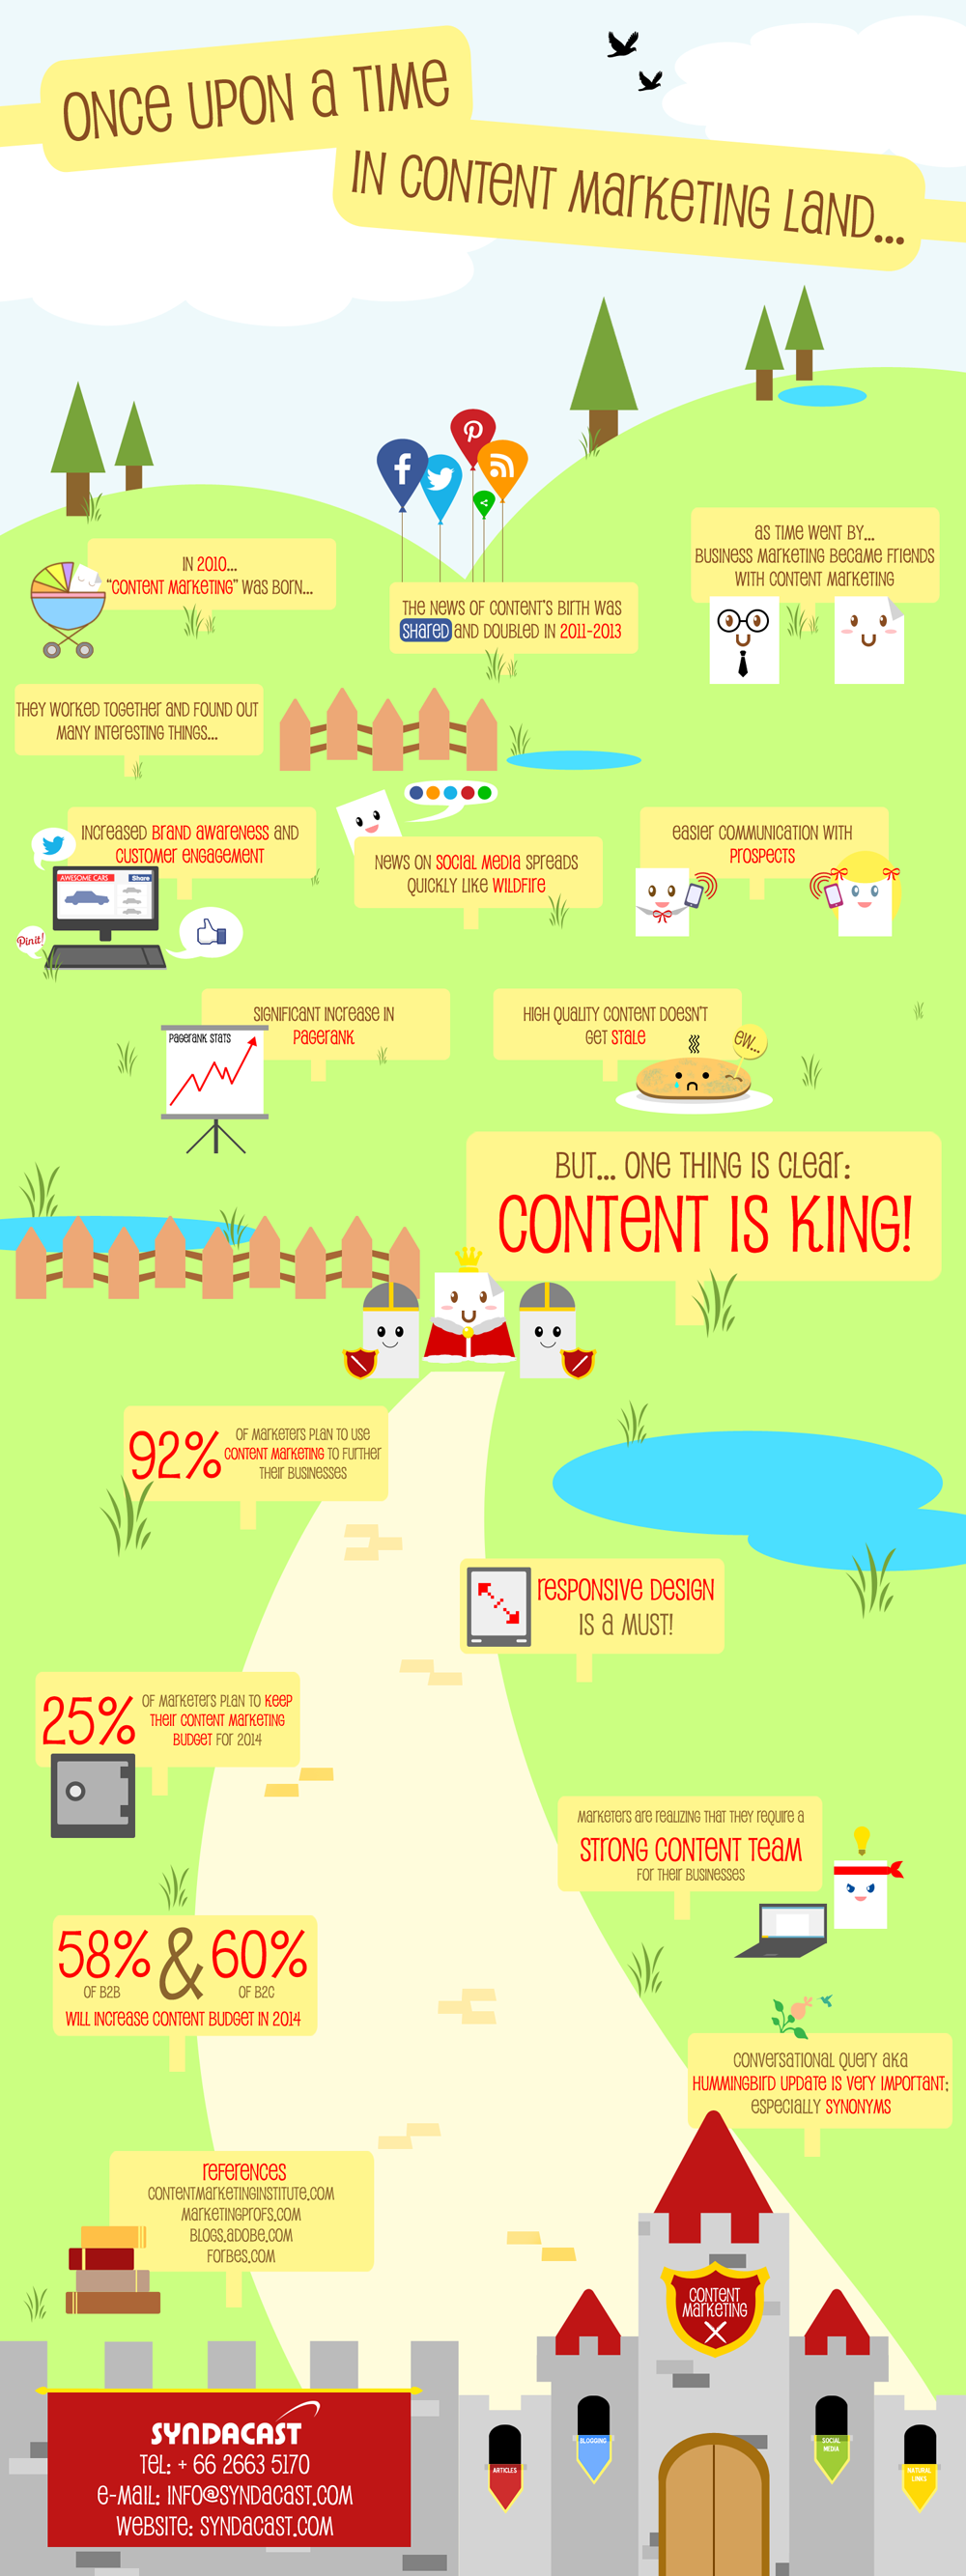 Once Upon A Time in Content Marketing Land